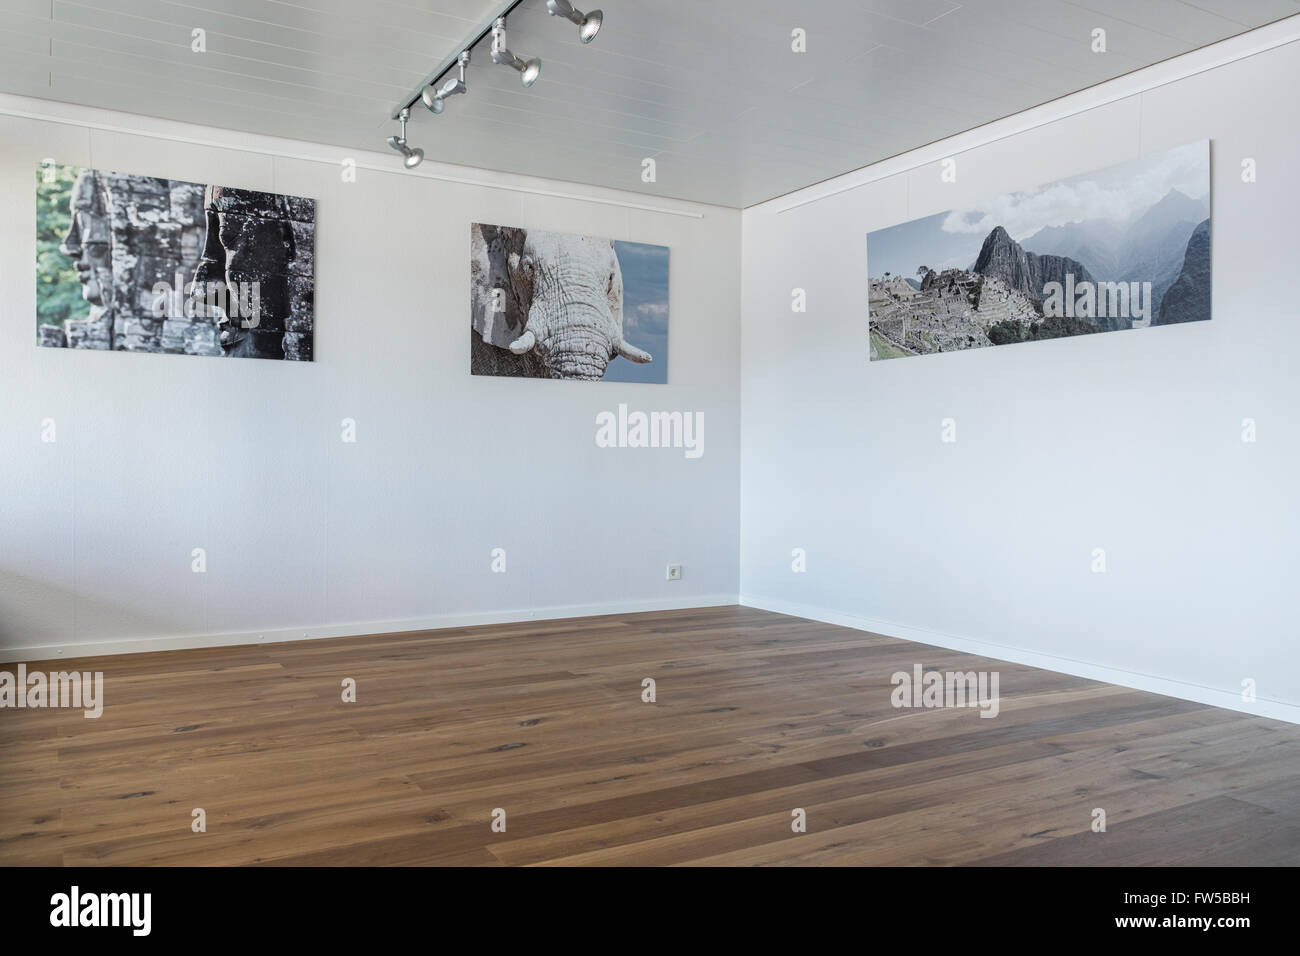 Empty room with parquet floor and individual posters hanging on the wall Stock Photo